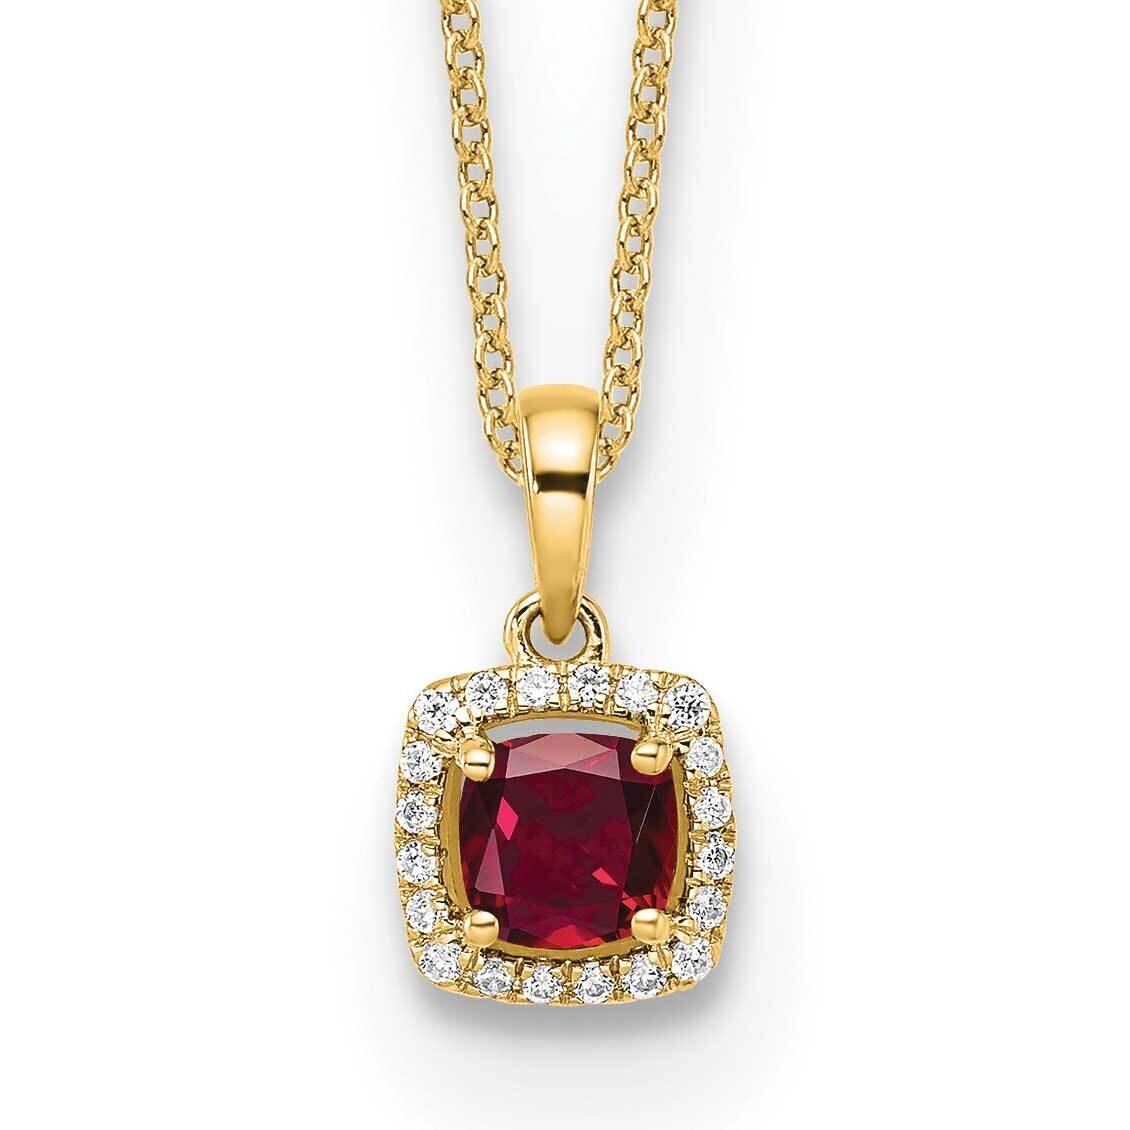 Diamond Created Ruby Pendant Necklace 10k Gold PM8582-CRU-010-0YLG